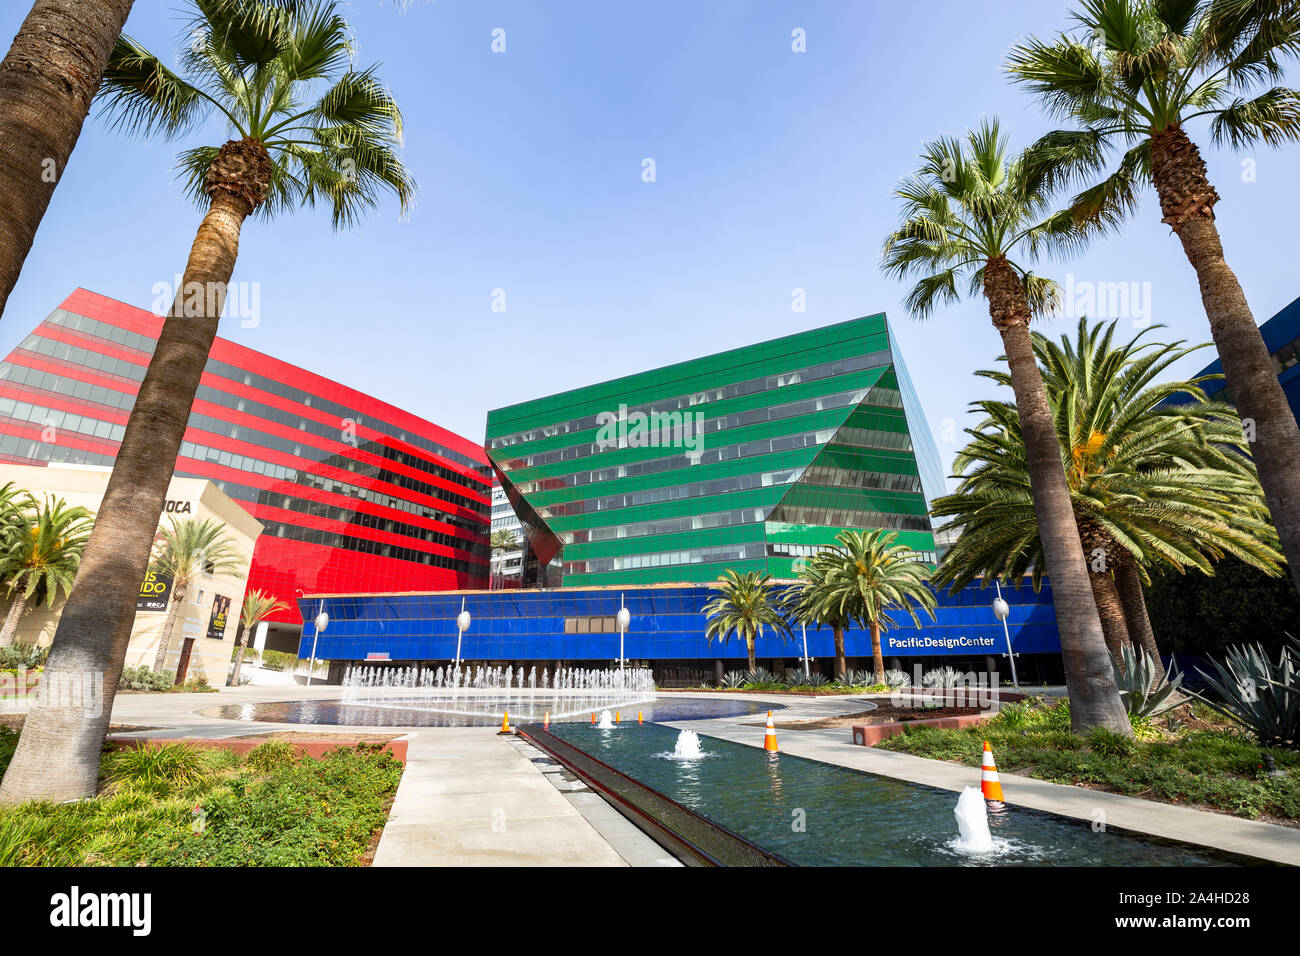 The Pacific Design Center, designed by Cesar Pelli, houses design showrooms and hosts events in West Hollywood, California Stock Photo